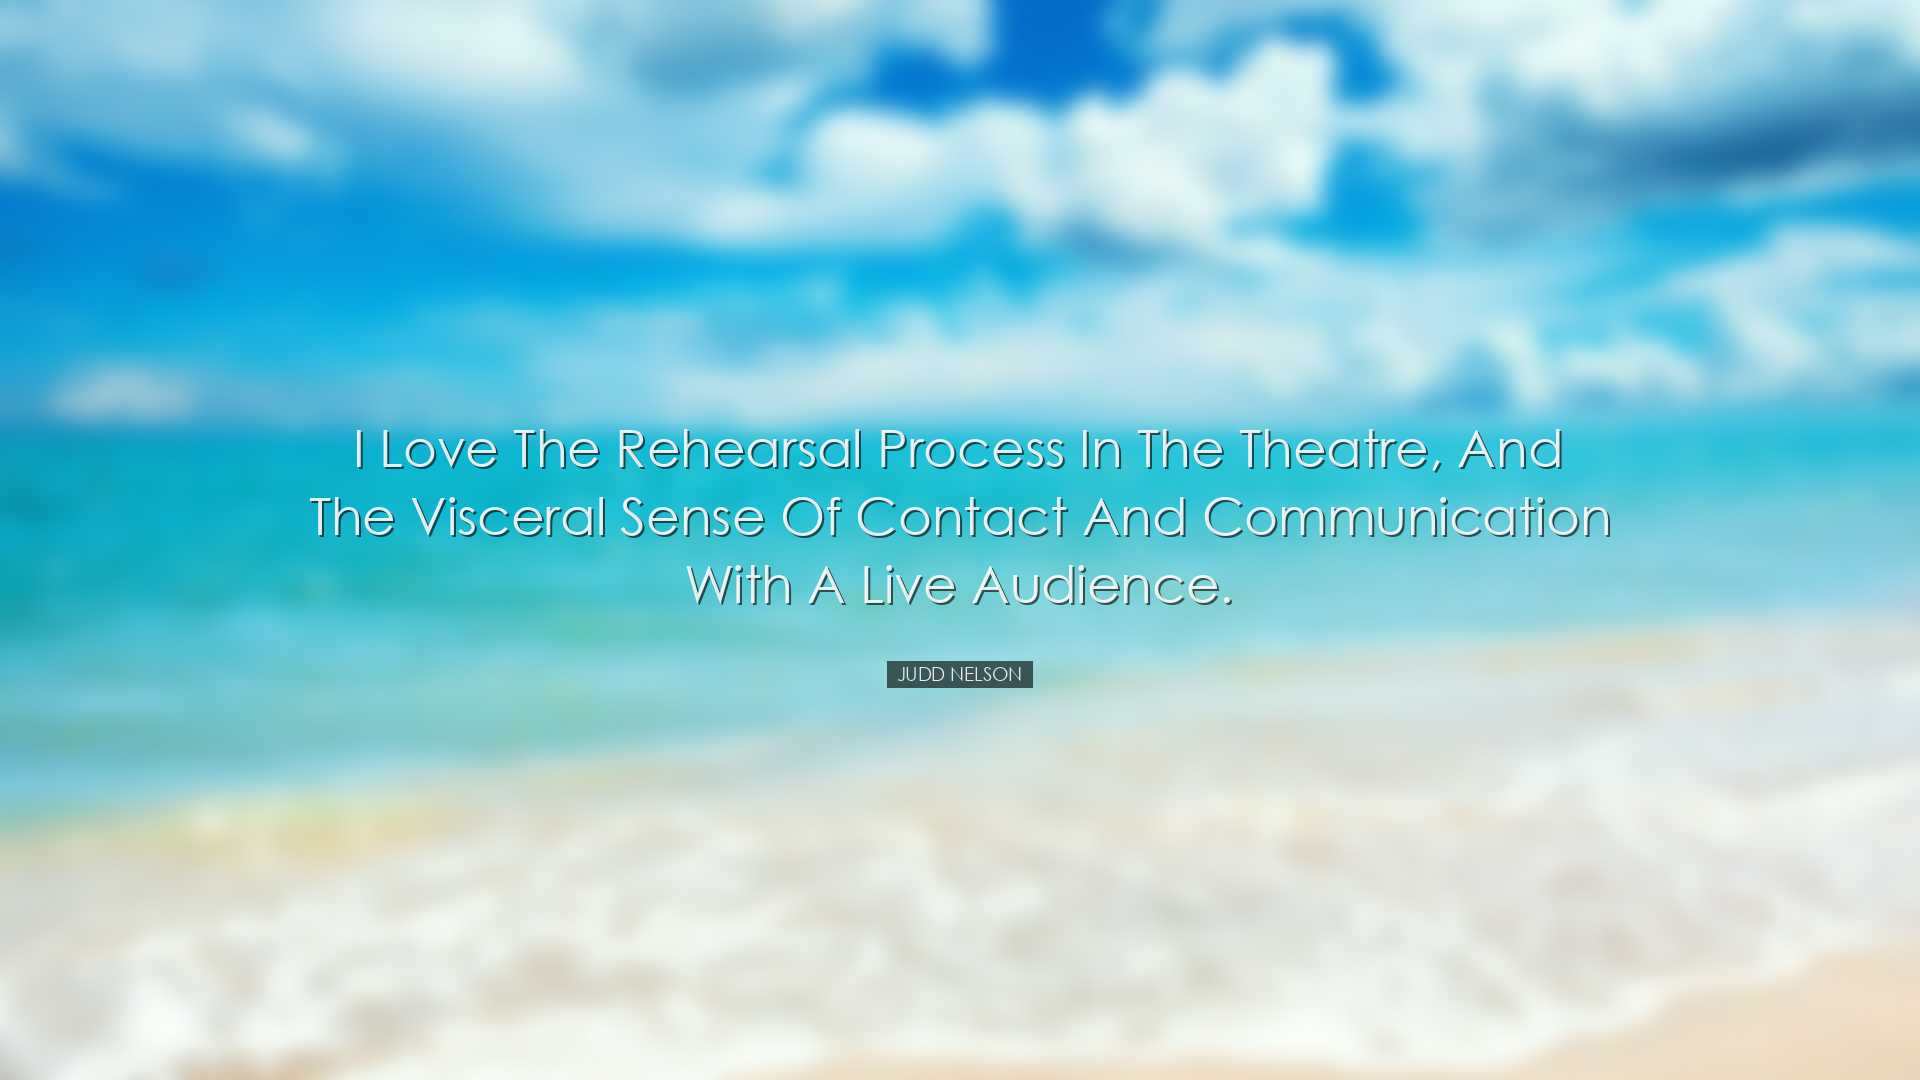 I love the rehearsal process in the theatre, and the visceral sens